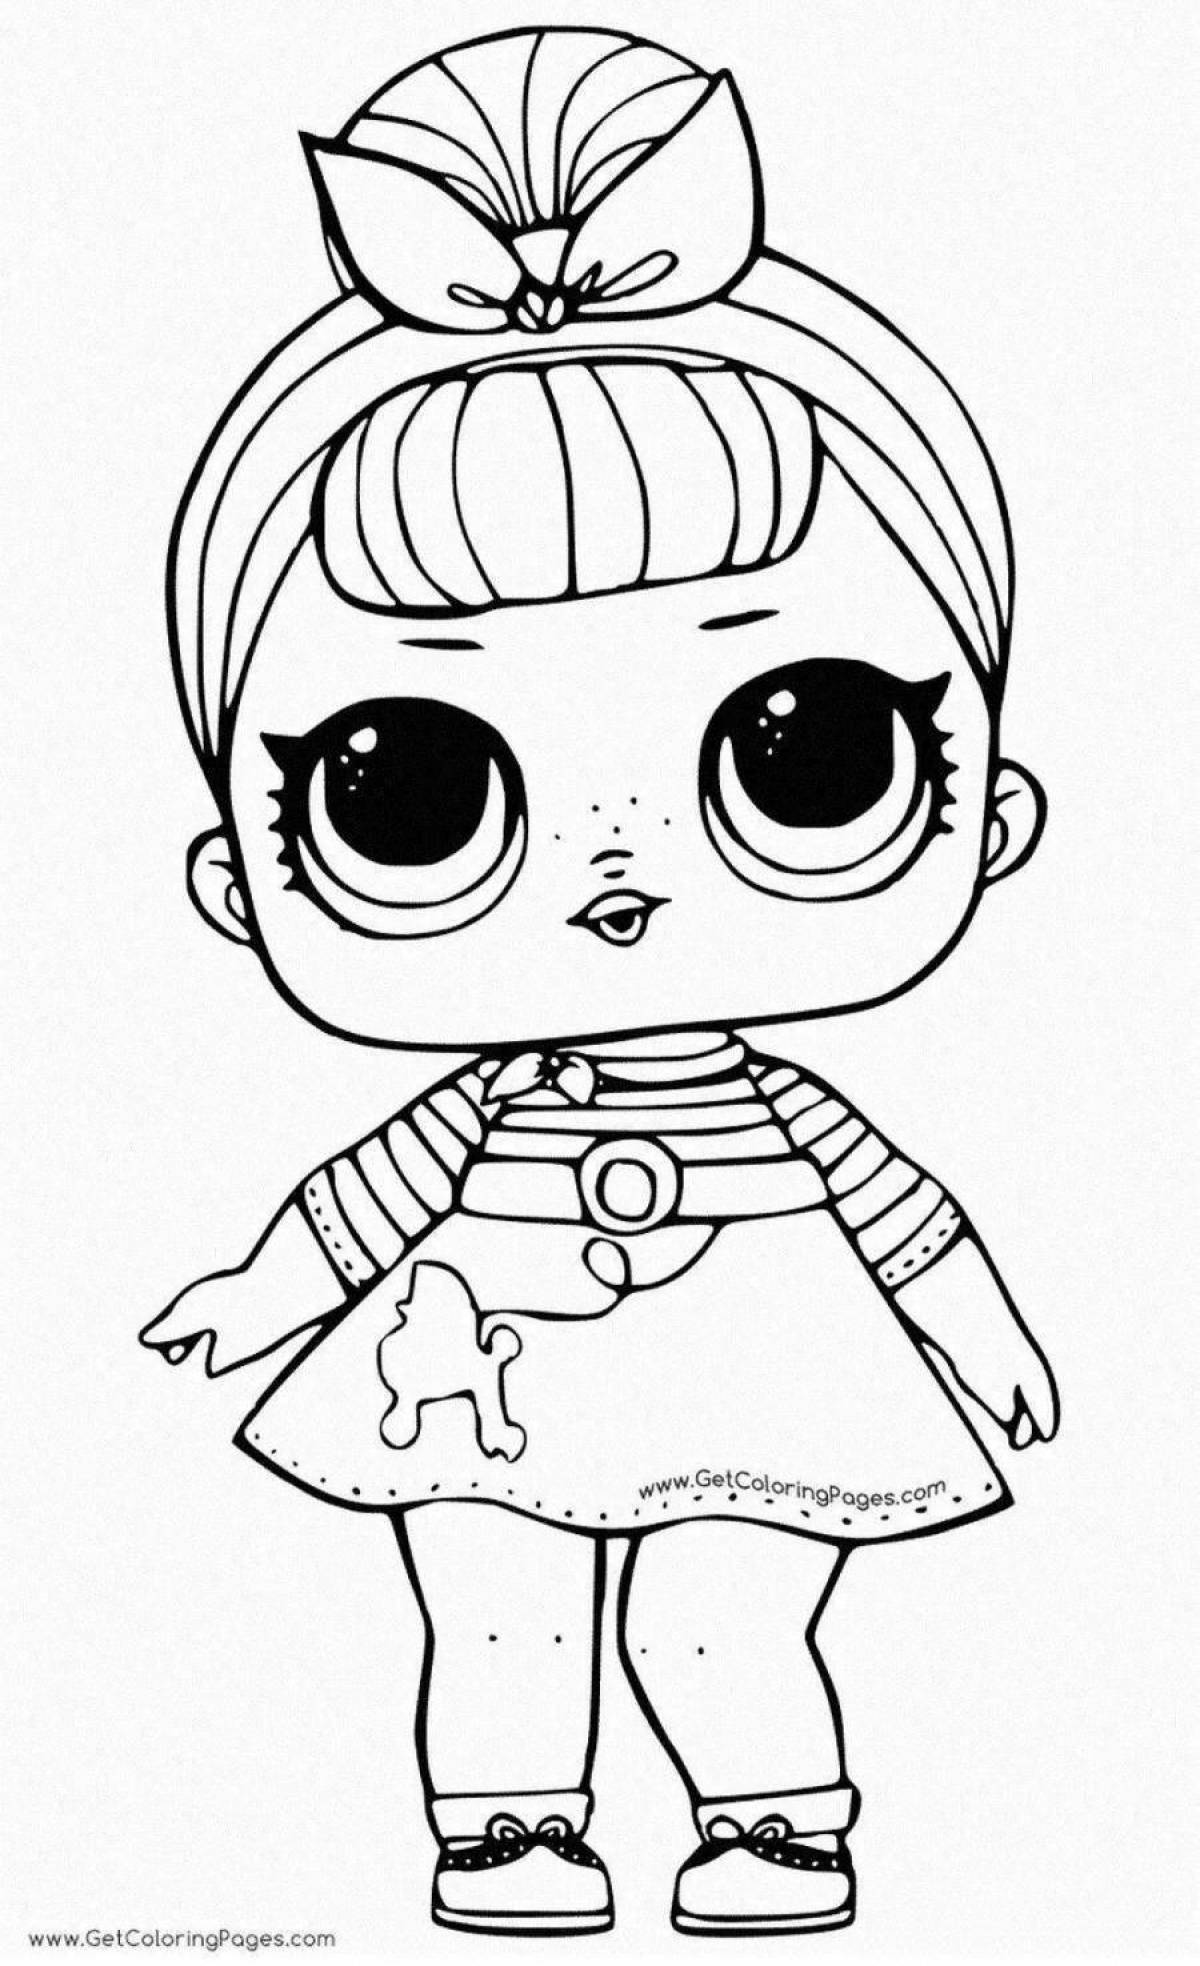 Charming lola doll coloring book for 3-4 year olds